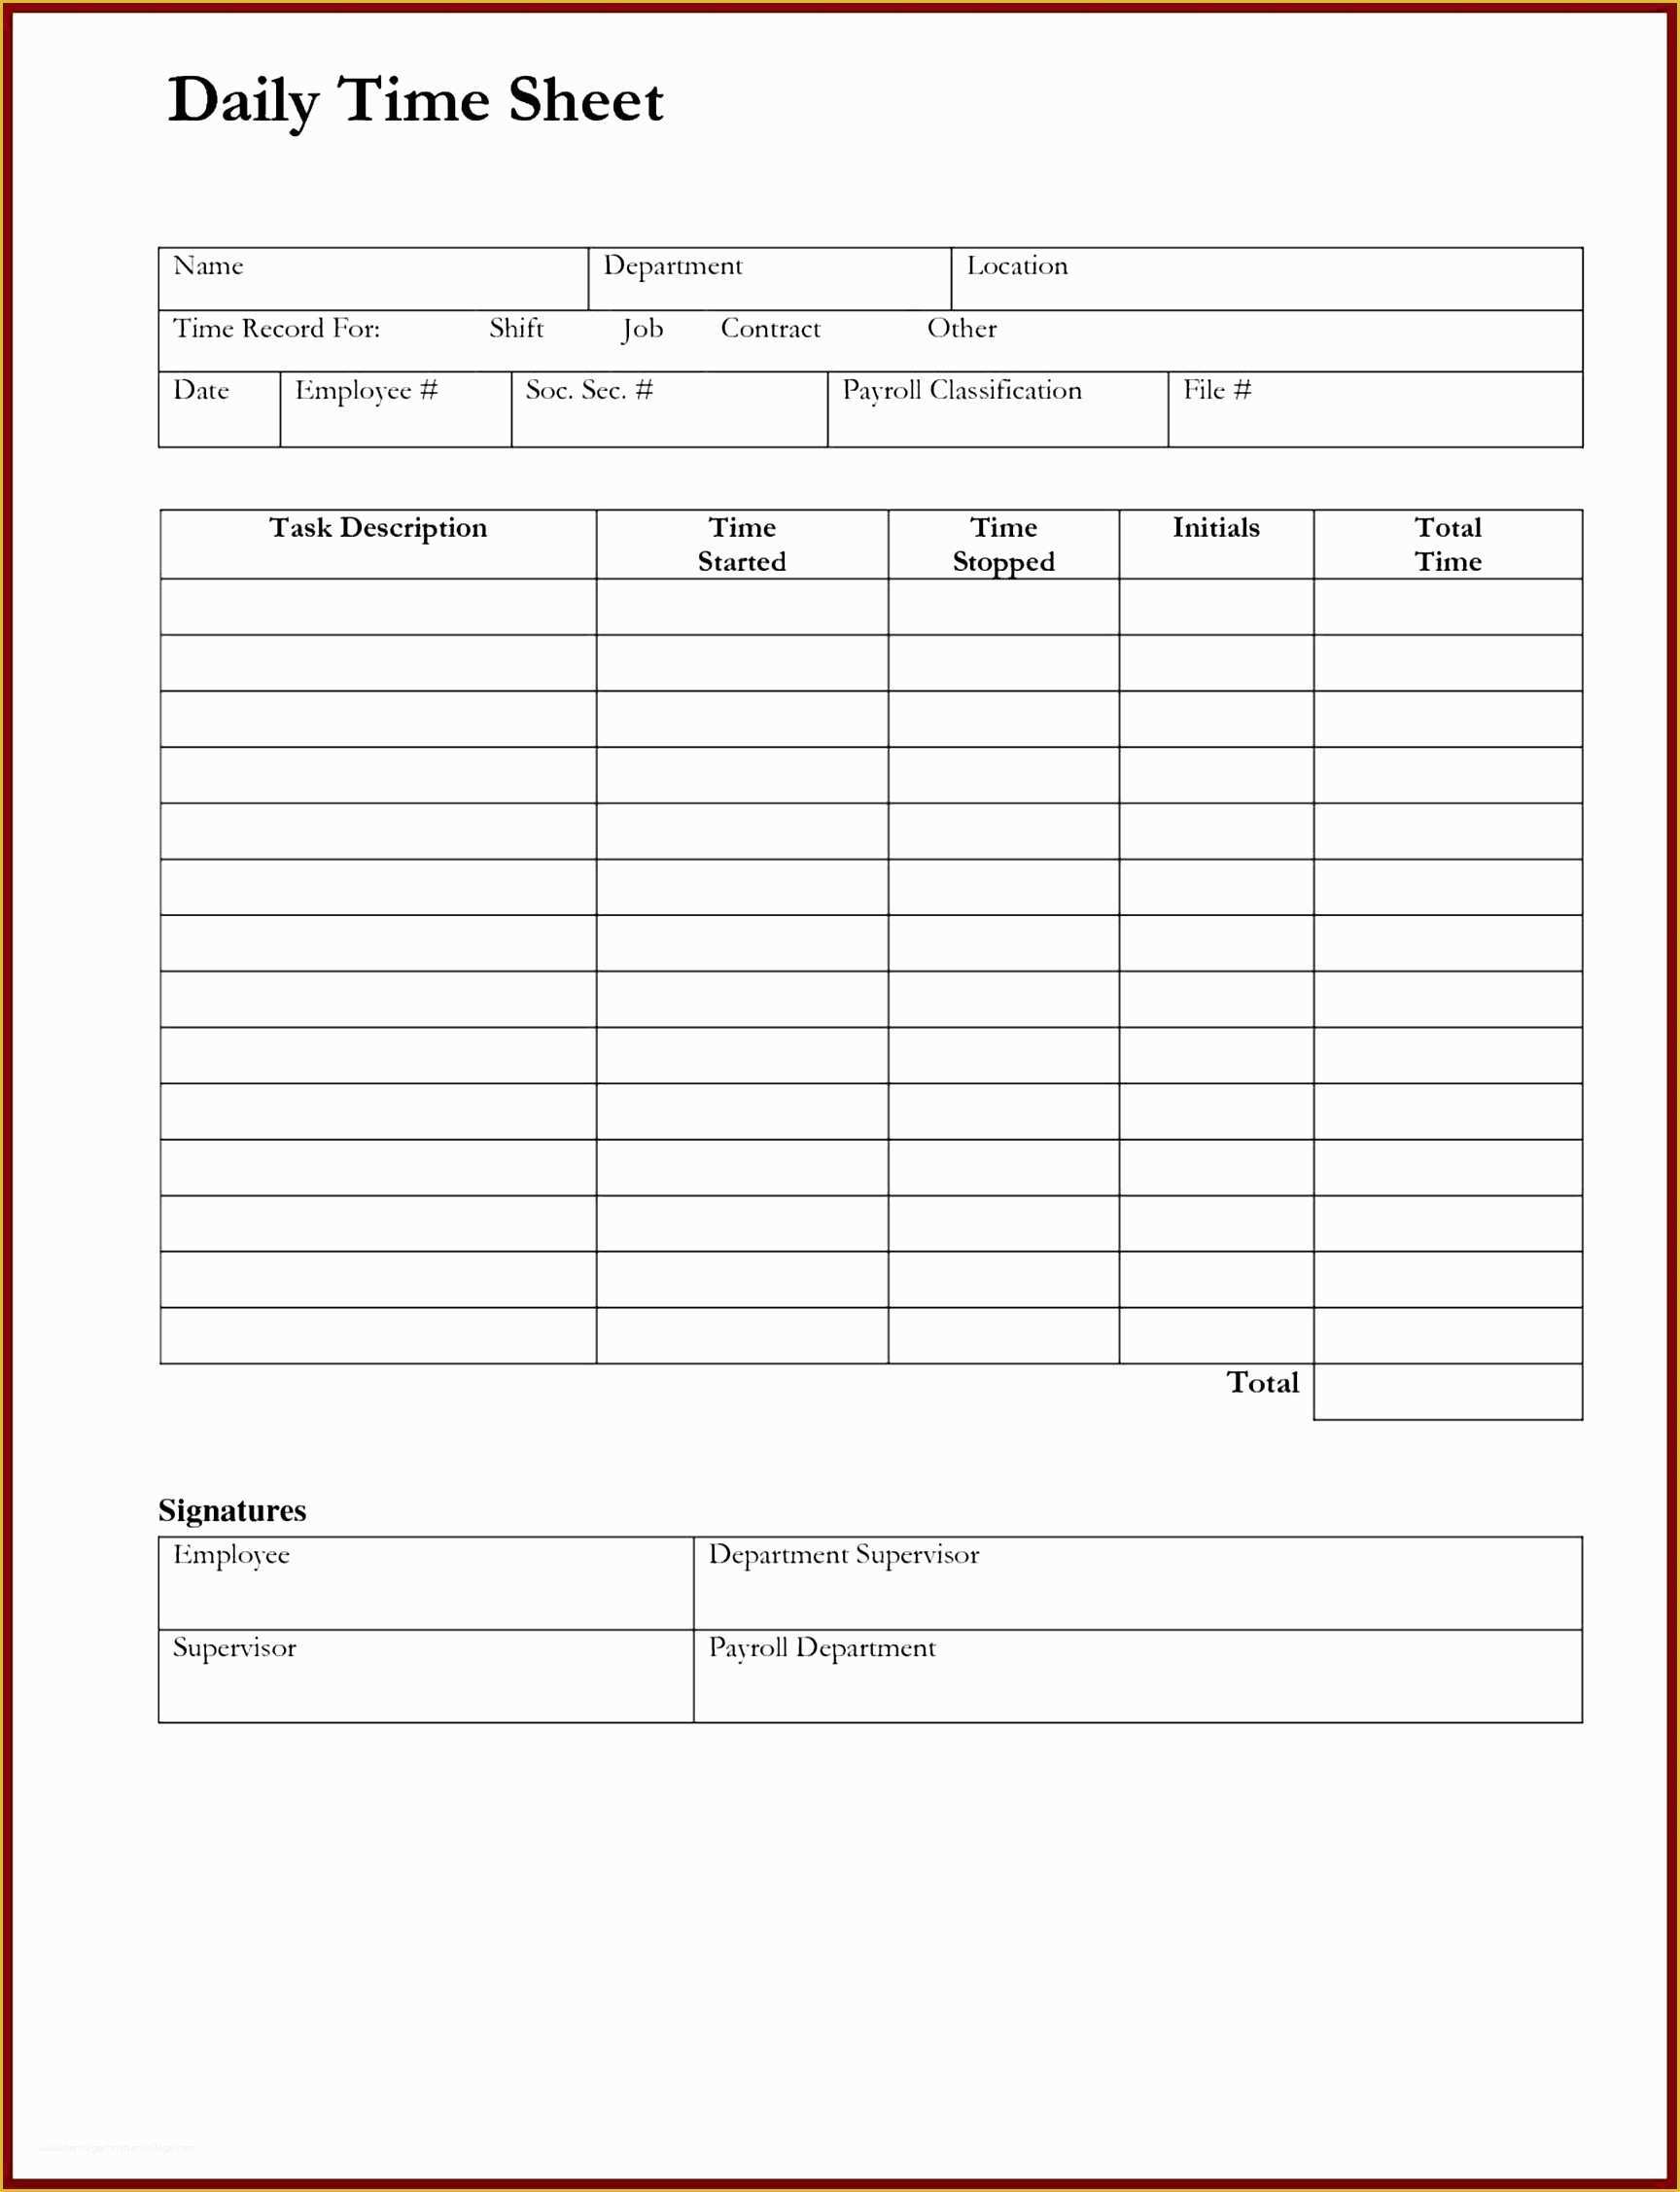 Timesheet Invoice Template Free Of 10 Timesheet Calculator Excel Template Exceltemplates